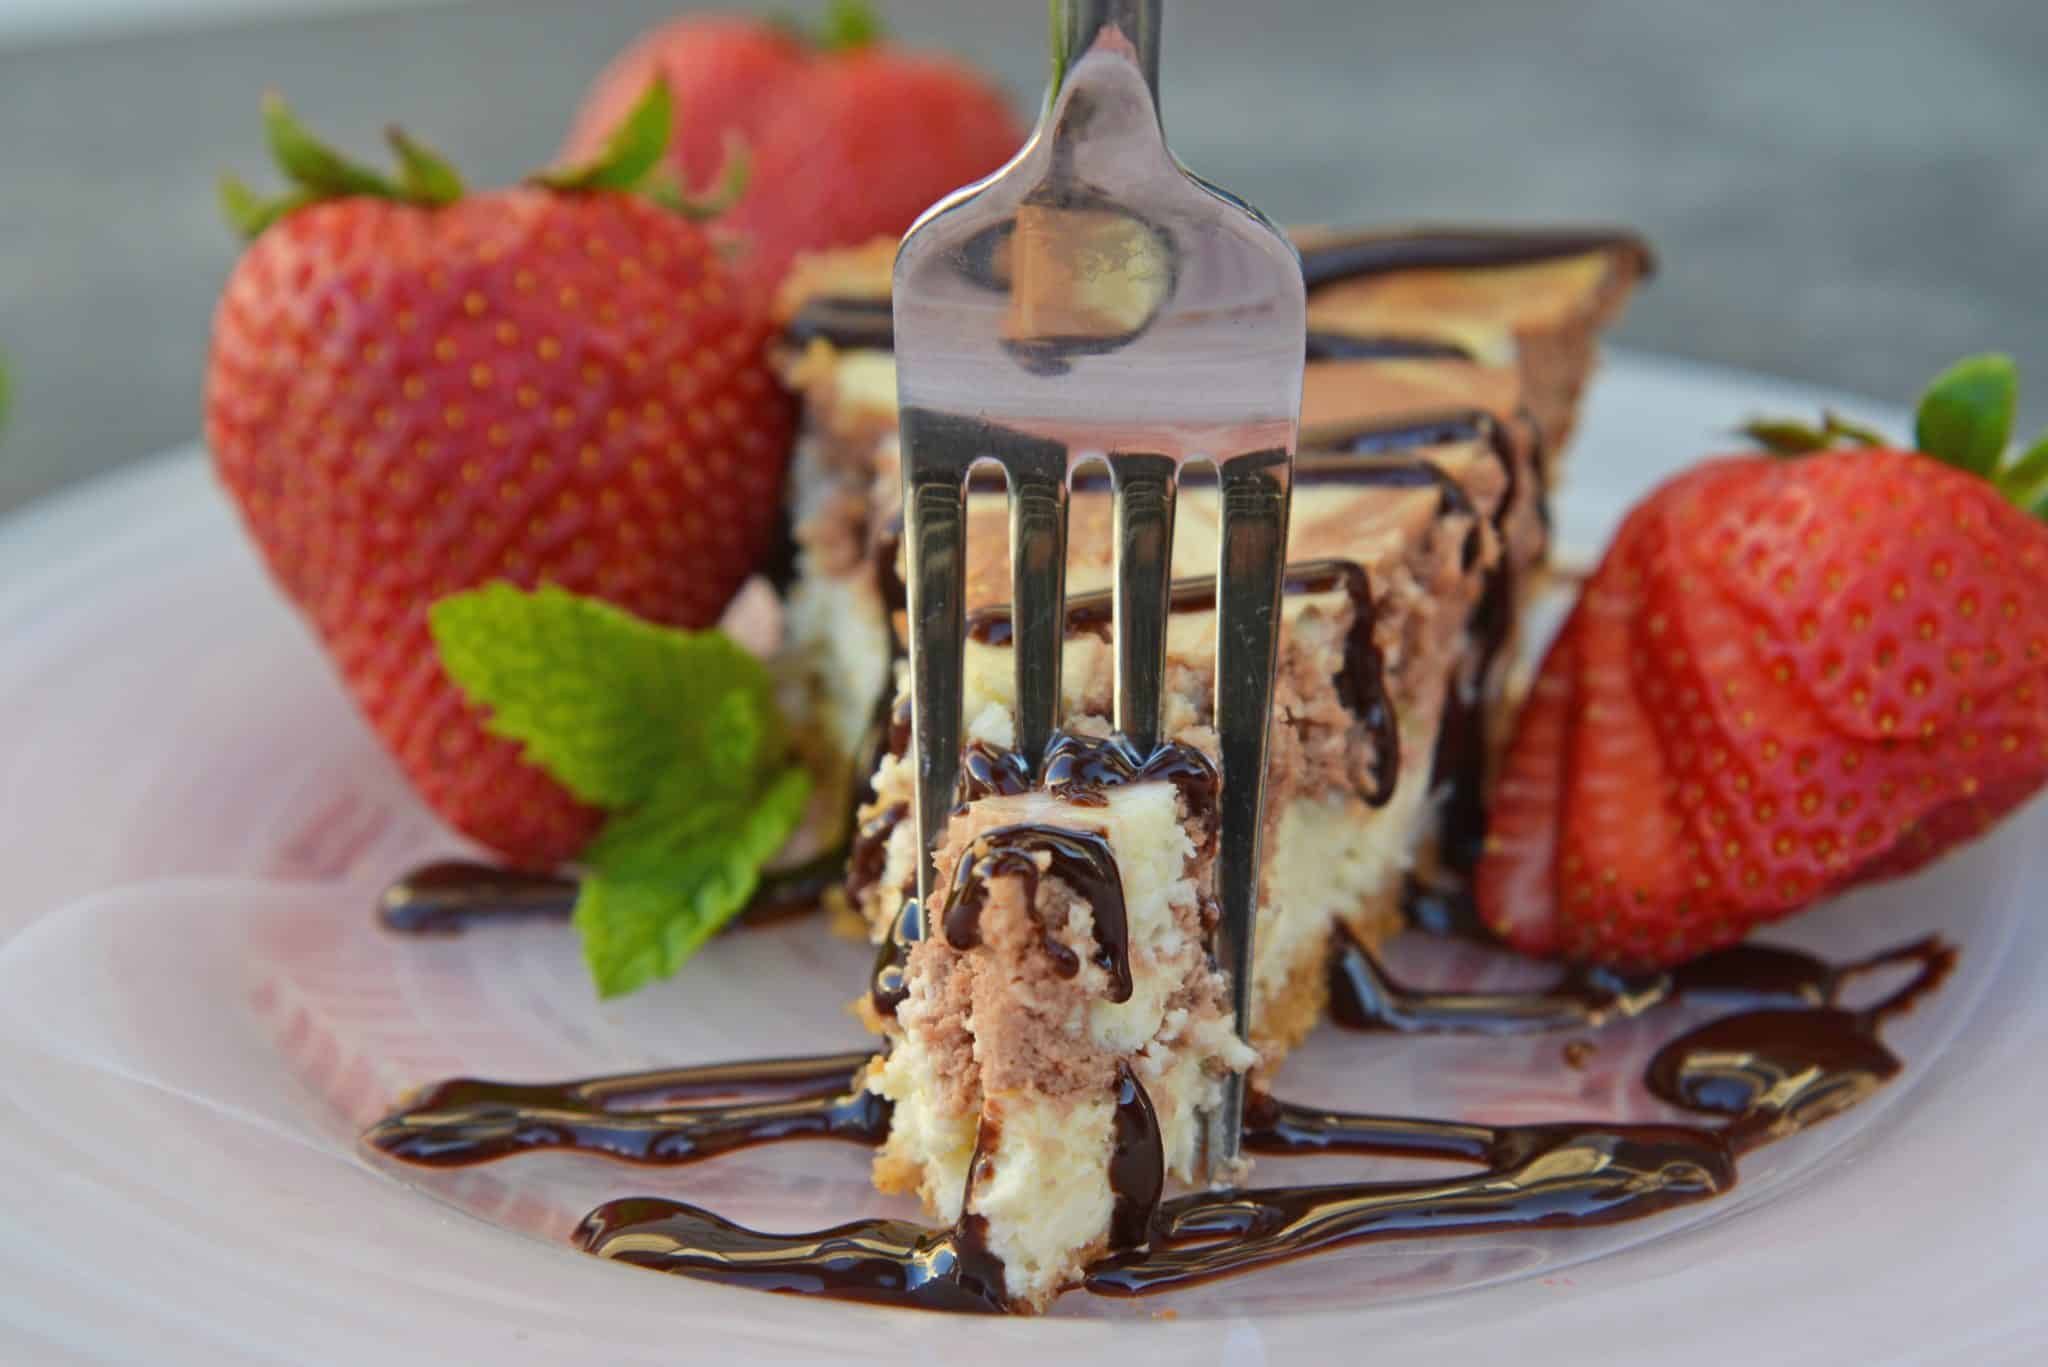 Marble New York Cheesecake is one of the best cheesecake recipes you'll ever come across! This dessert is a thicker but deliciously creamy cheesecake recipe! #newyorkstylecheesecake #bestcheesecakerecipes www.savoryexperiments.com